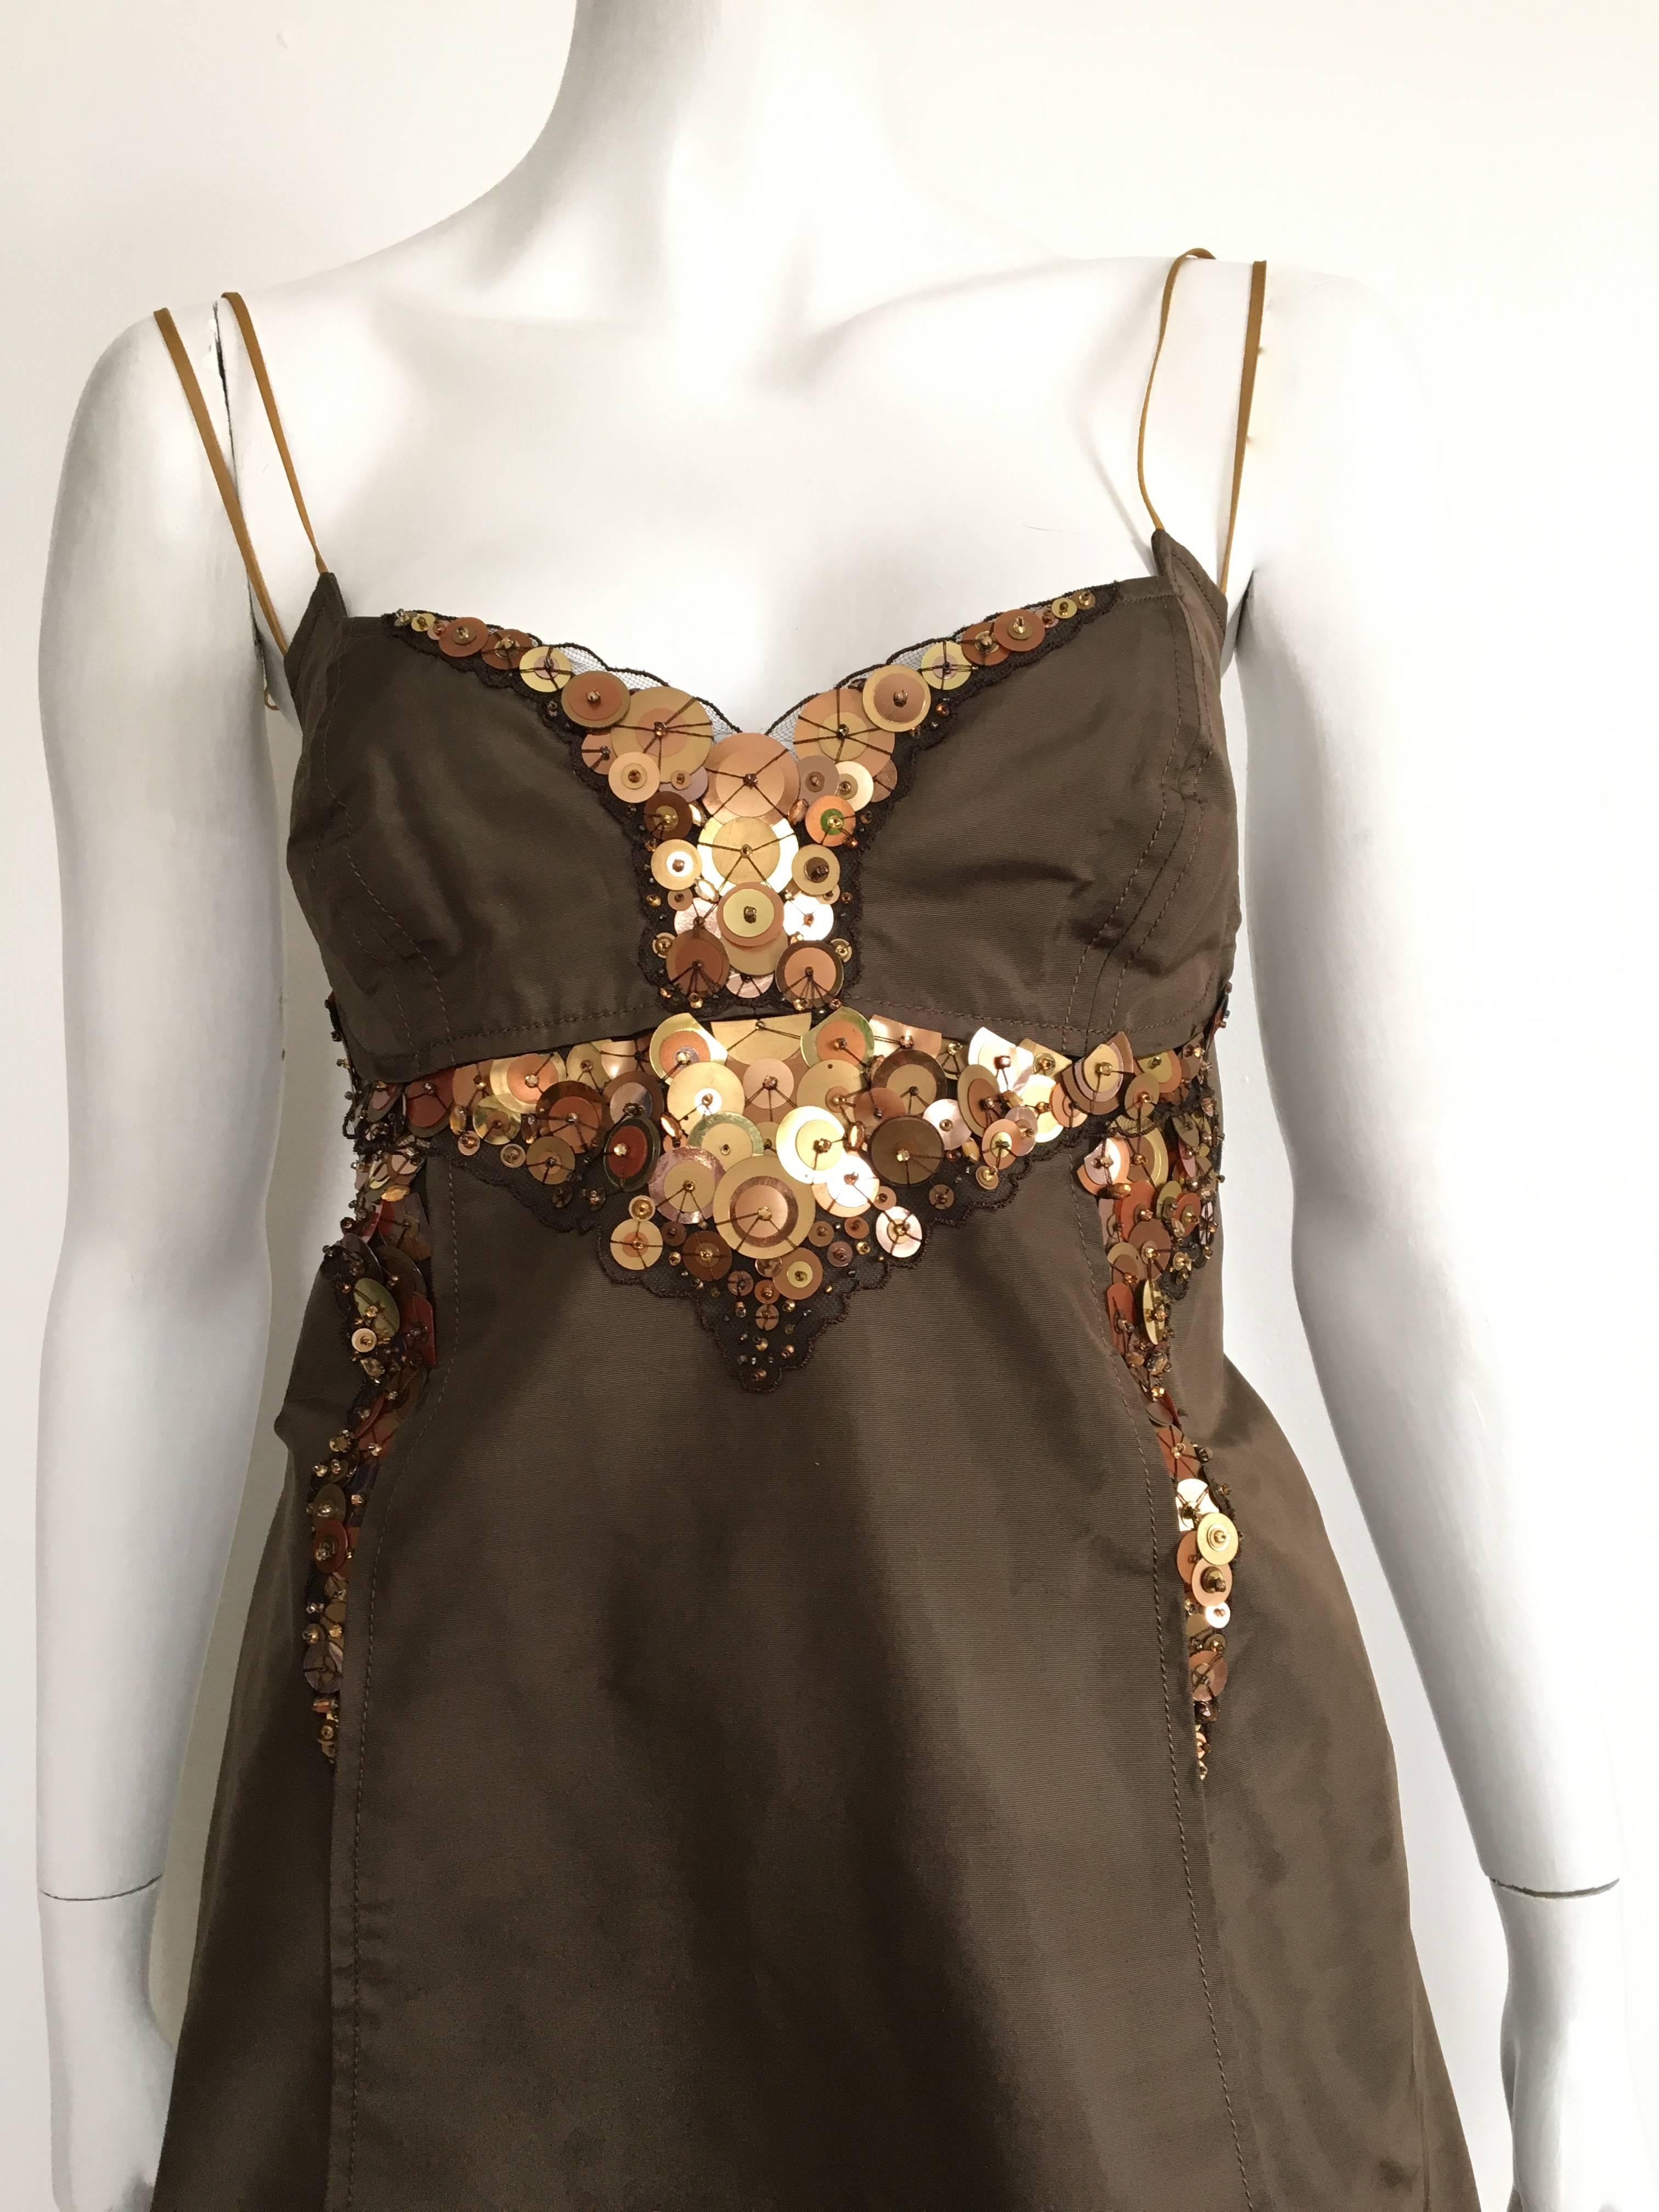 Carolina Herrera brown silk taffeta sequin & beaded trim cocktail dress is a size 10.  Please see & use measurements below so you can properly measure your lovely body so you know this dress will fit the way Carolina wanted it to.  This